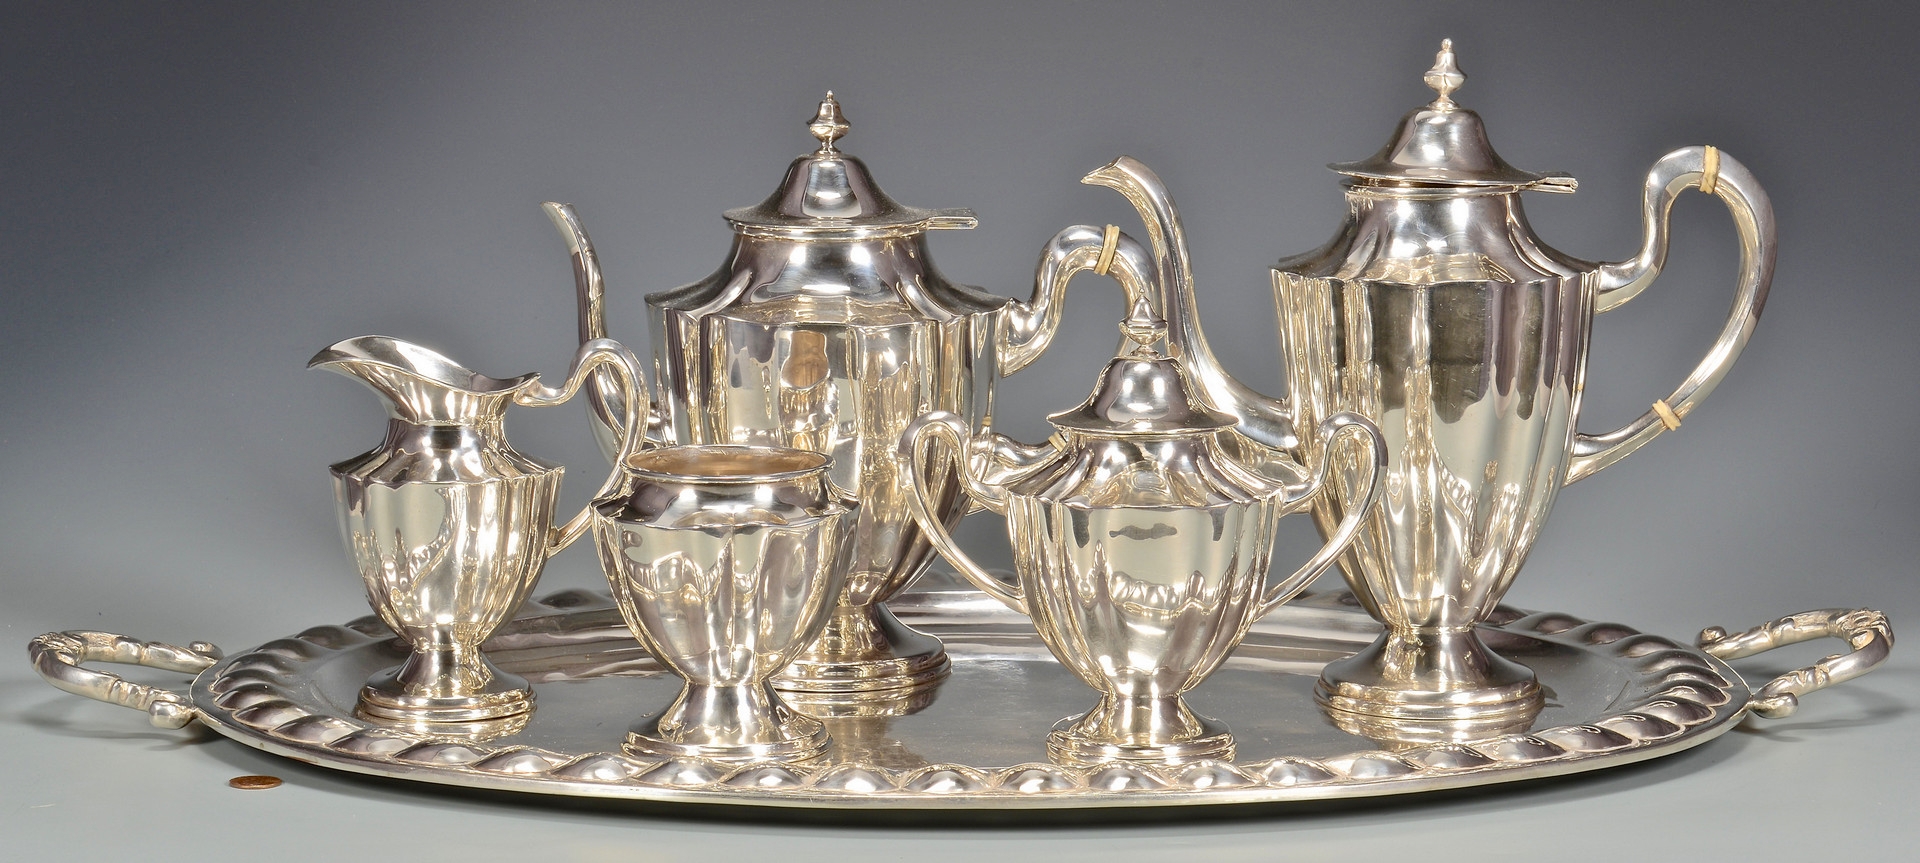 Lot 39: 6 pc. Mexican Sterling Tea Set w/ Sterling Tray